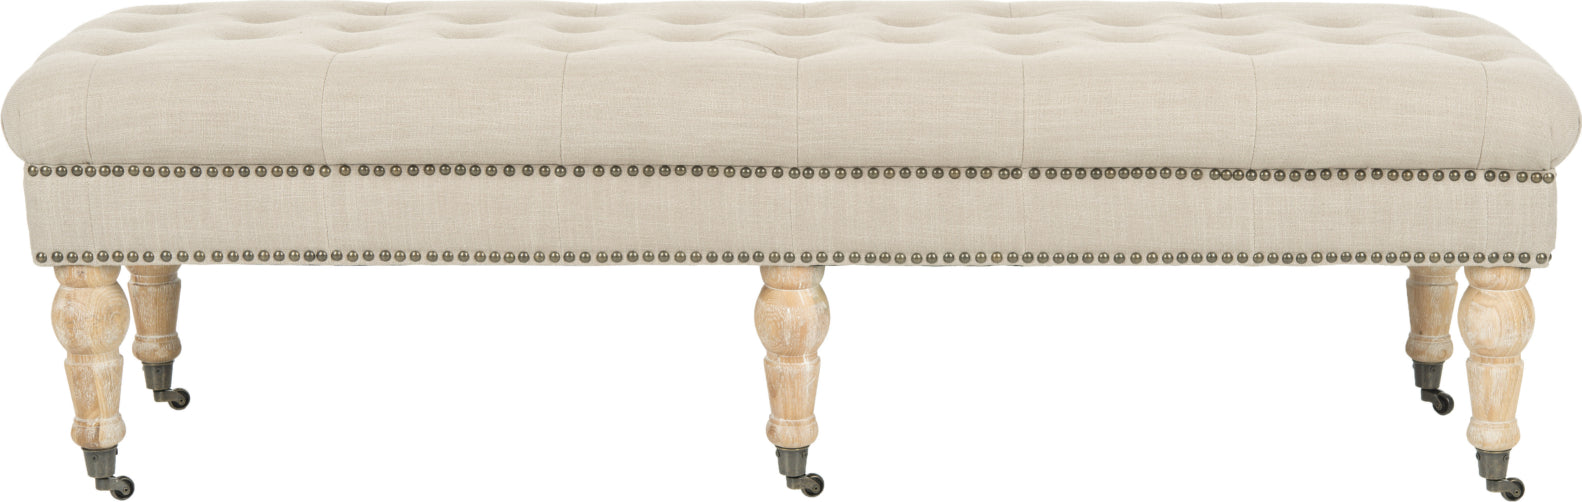 Safavieh Barney Tufted Bench-Brass Nail Heads True Taupe and Pickled Oak Furniture main image